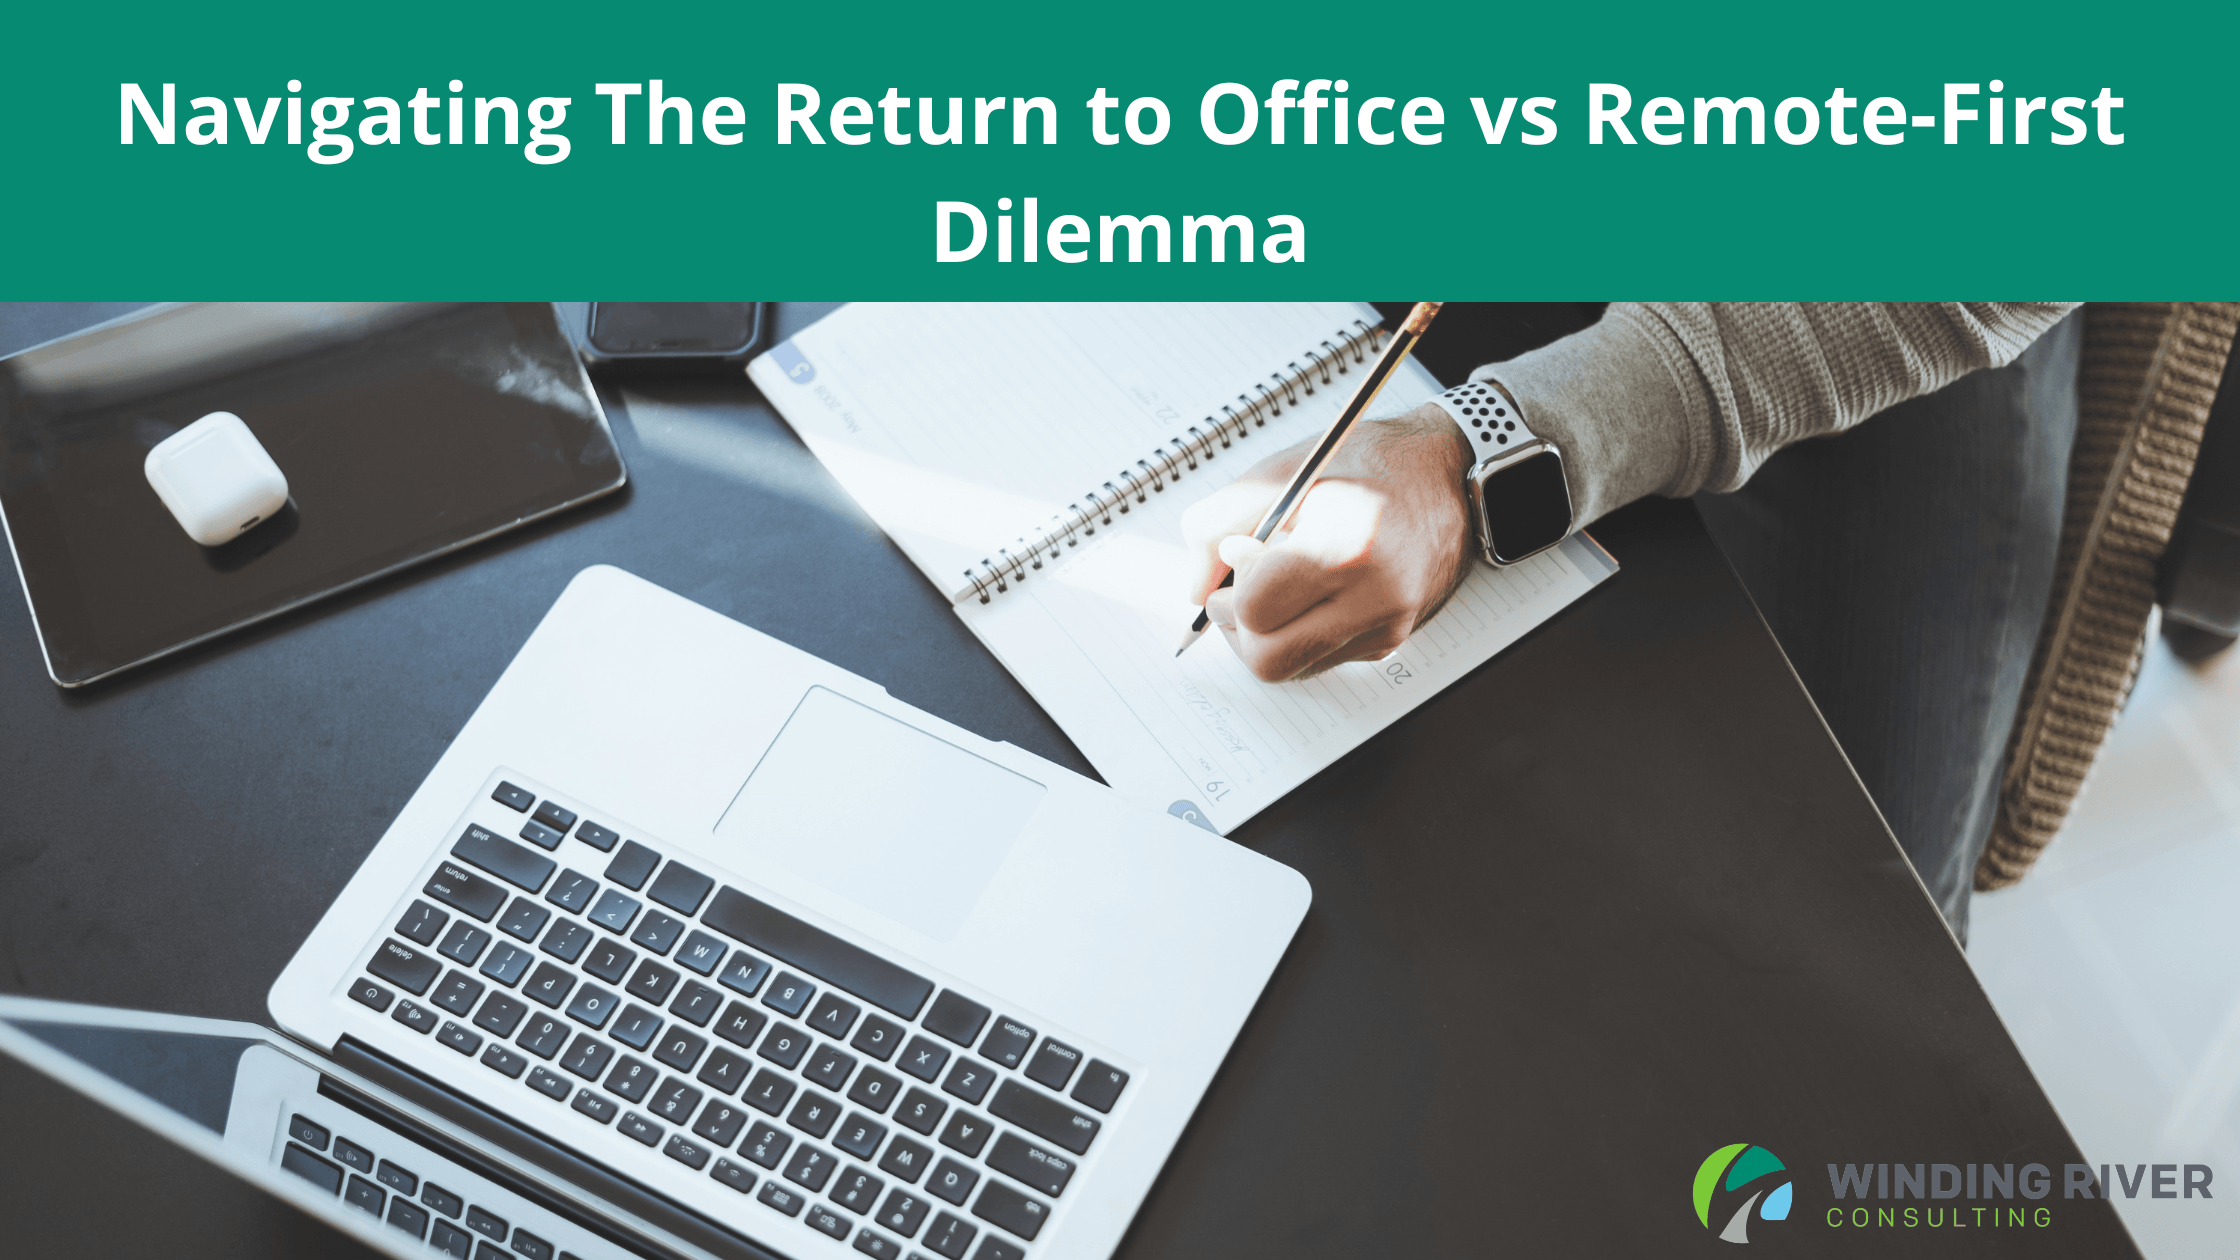 Navigating The Return to Office vs Remote-First Dilemma